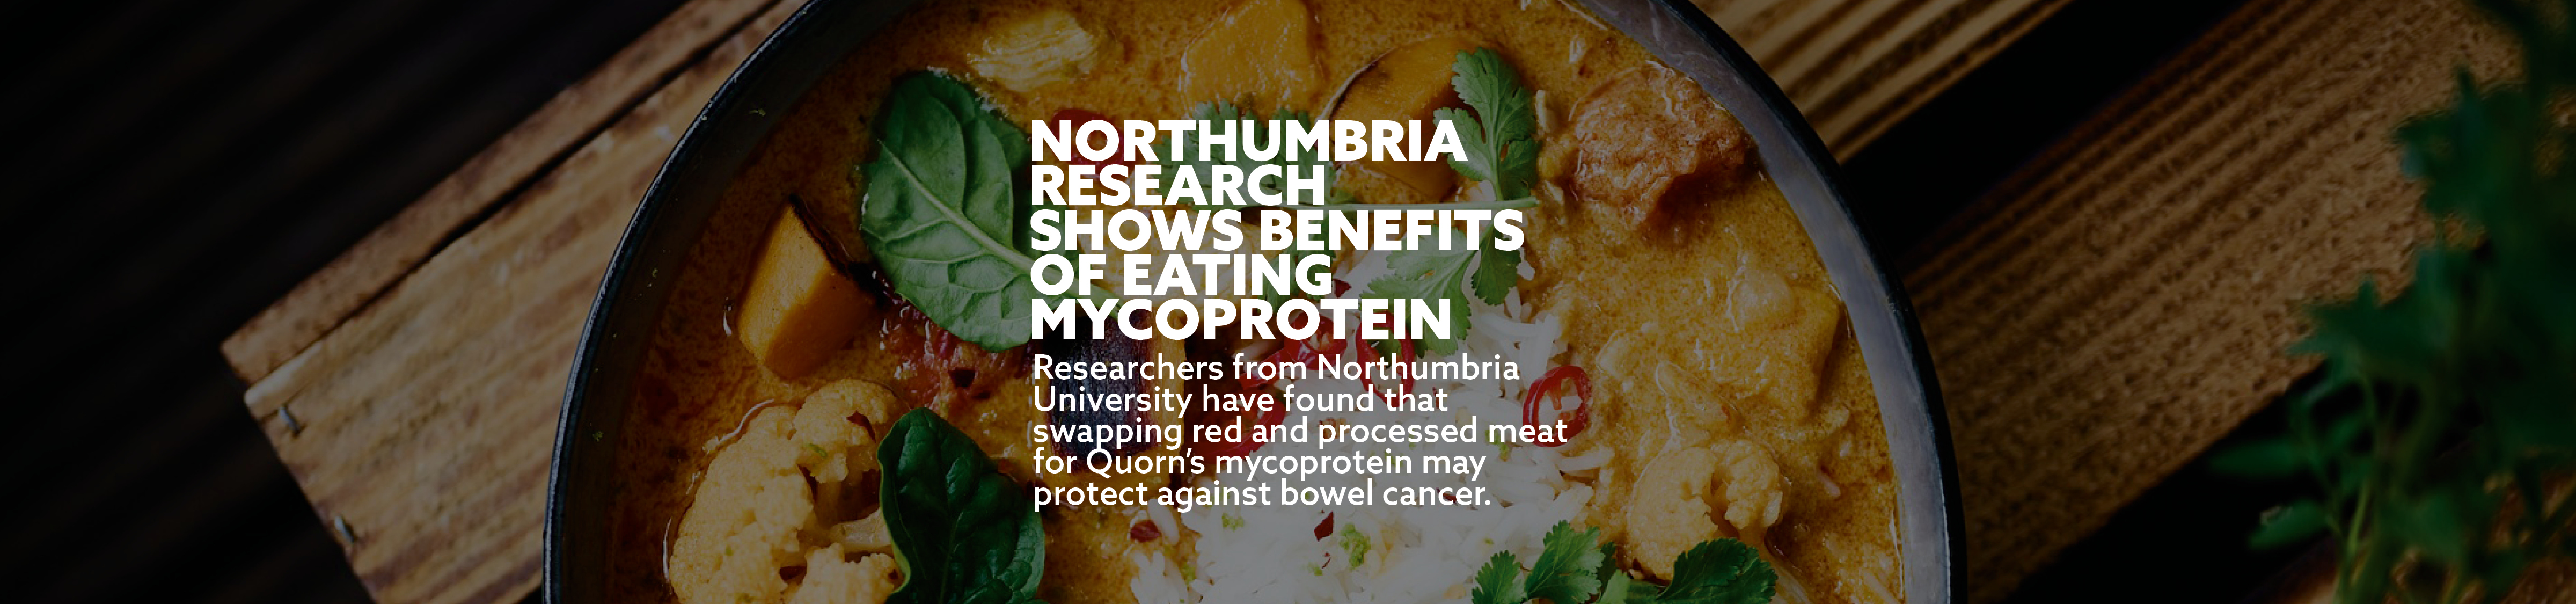 Northumbria research shows benefits of eating mycoprotein